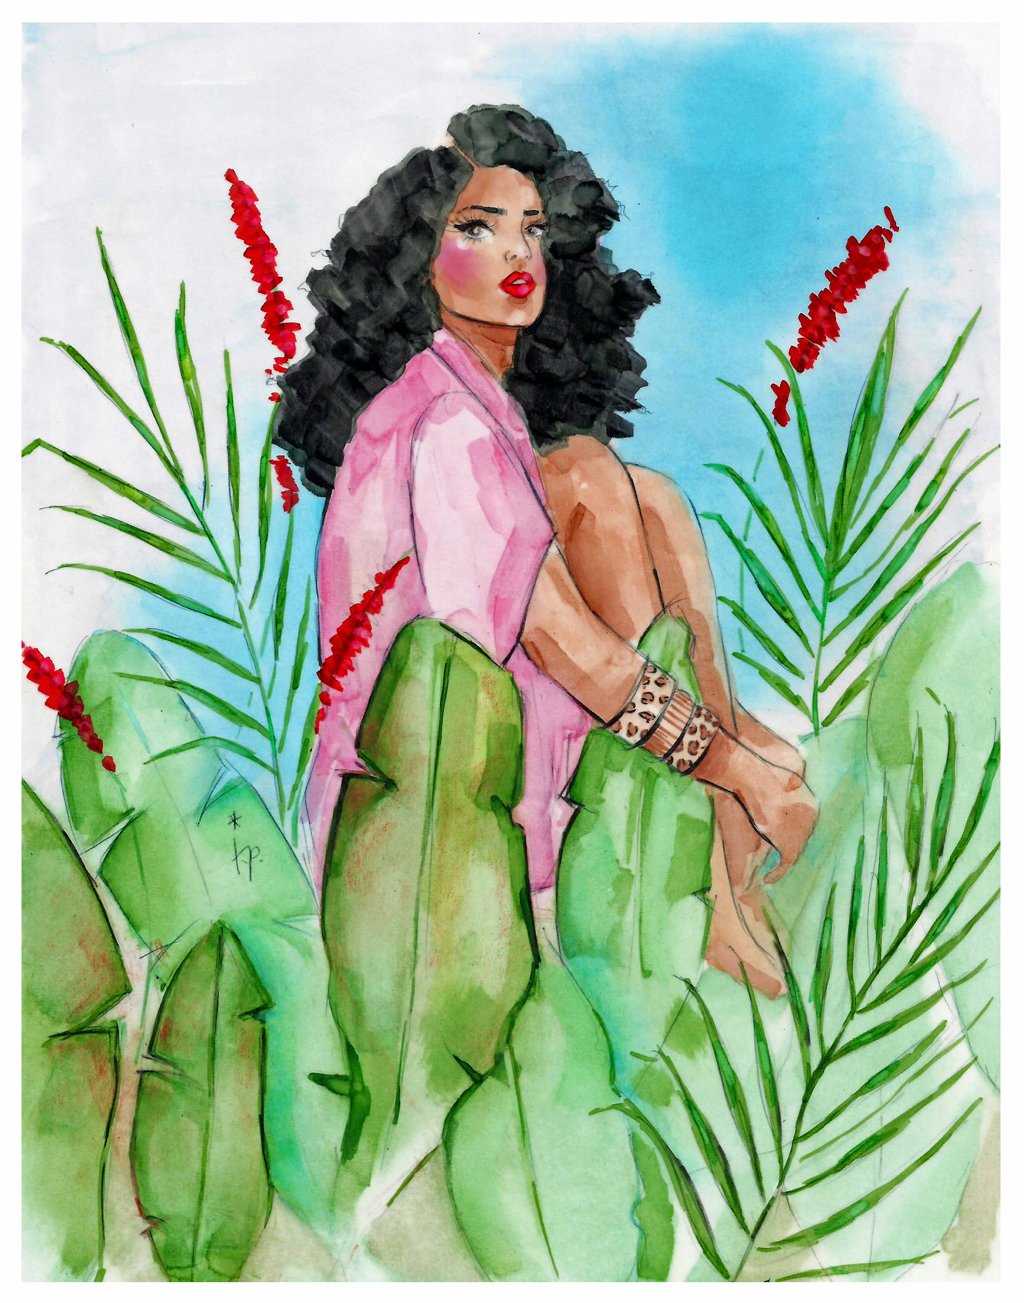 Illustration of a woman with curly hair wearing a pink shirt and sitting with her knees to her chest amongst tropical flowers and plants by Tatiana Poblah